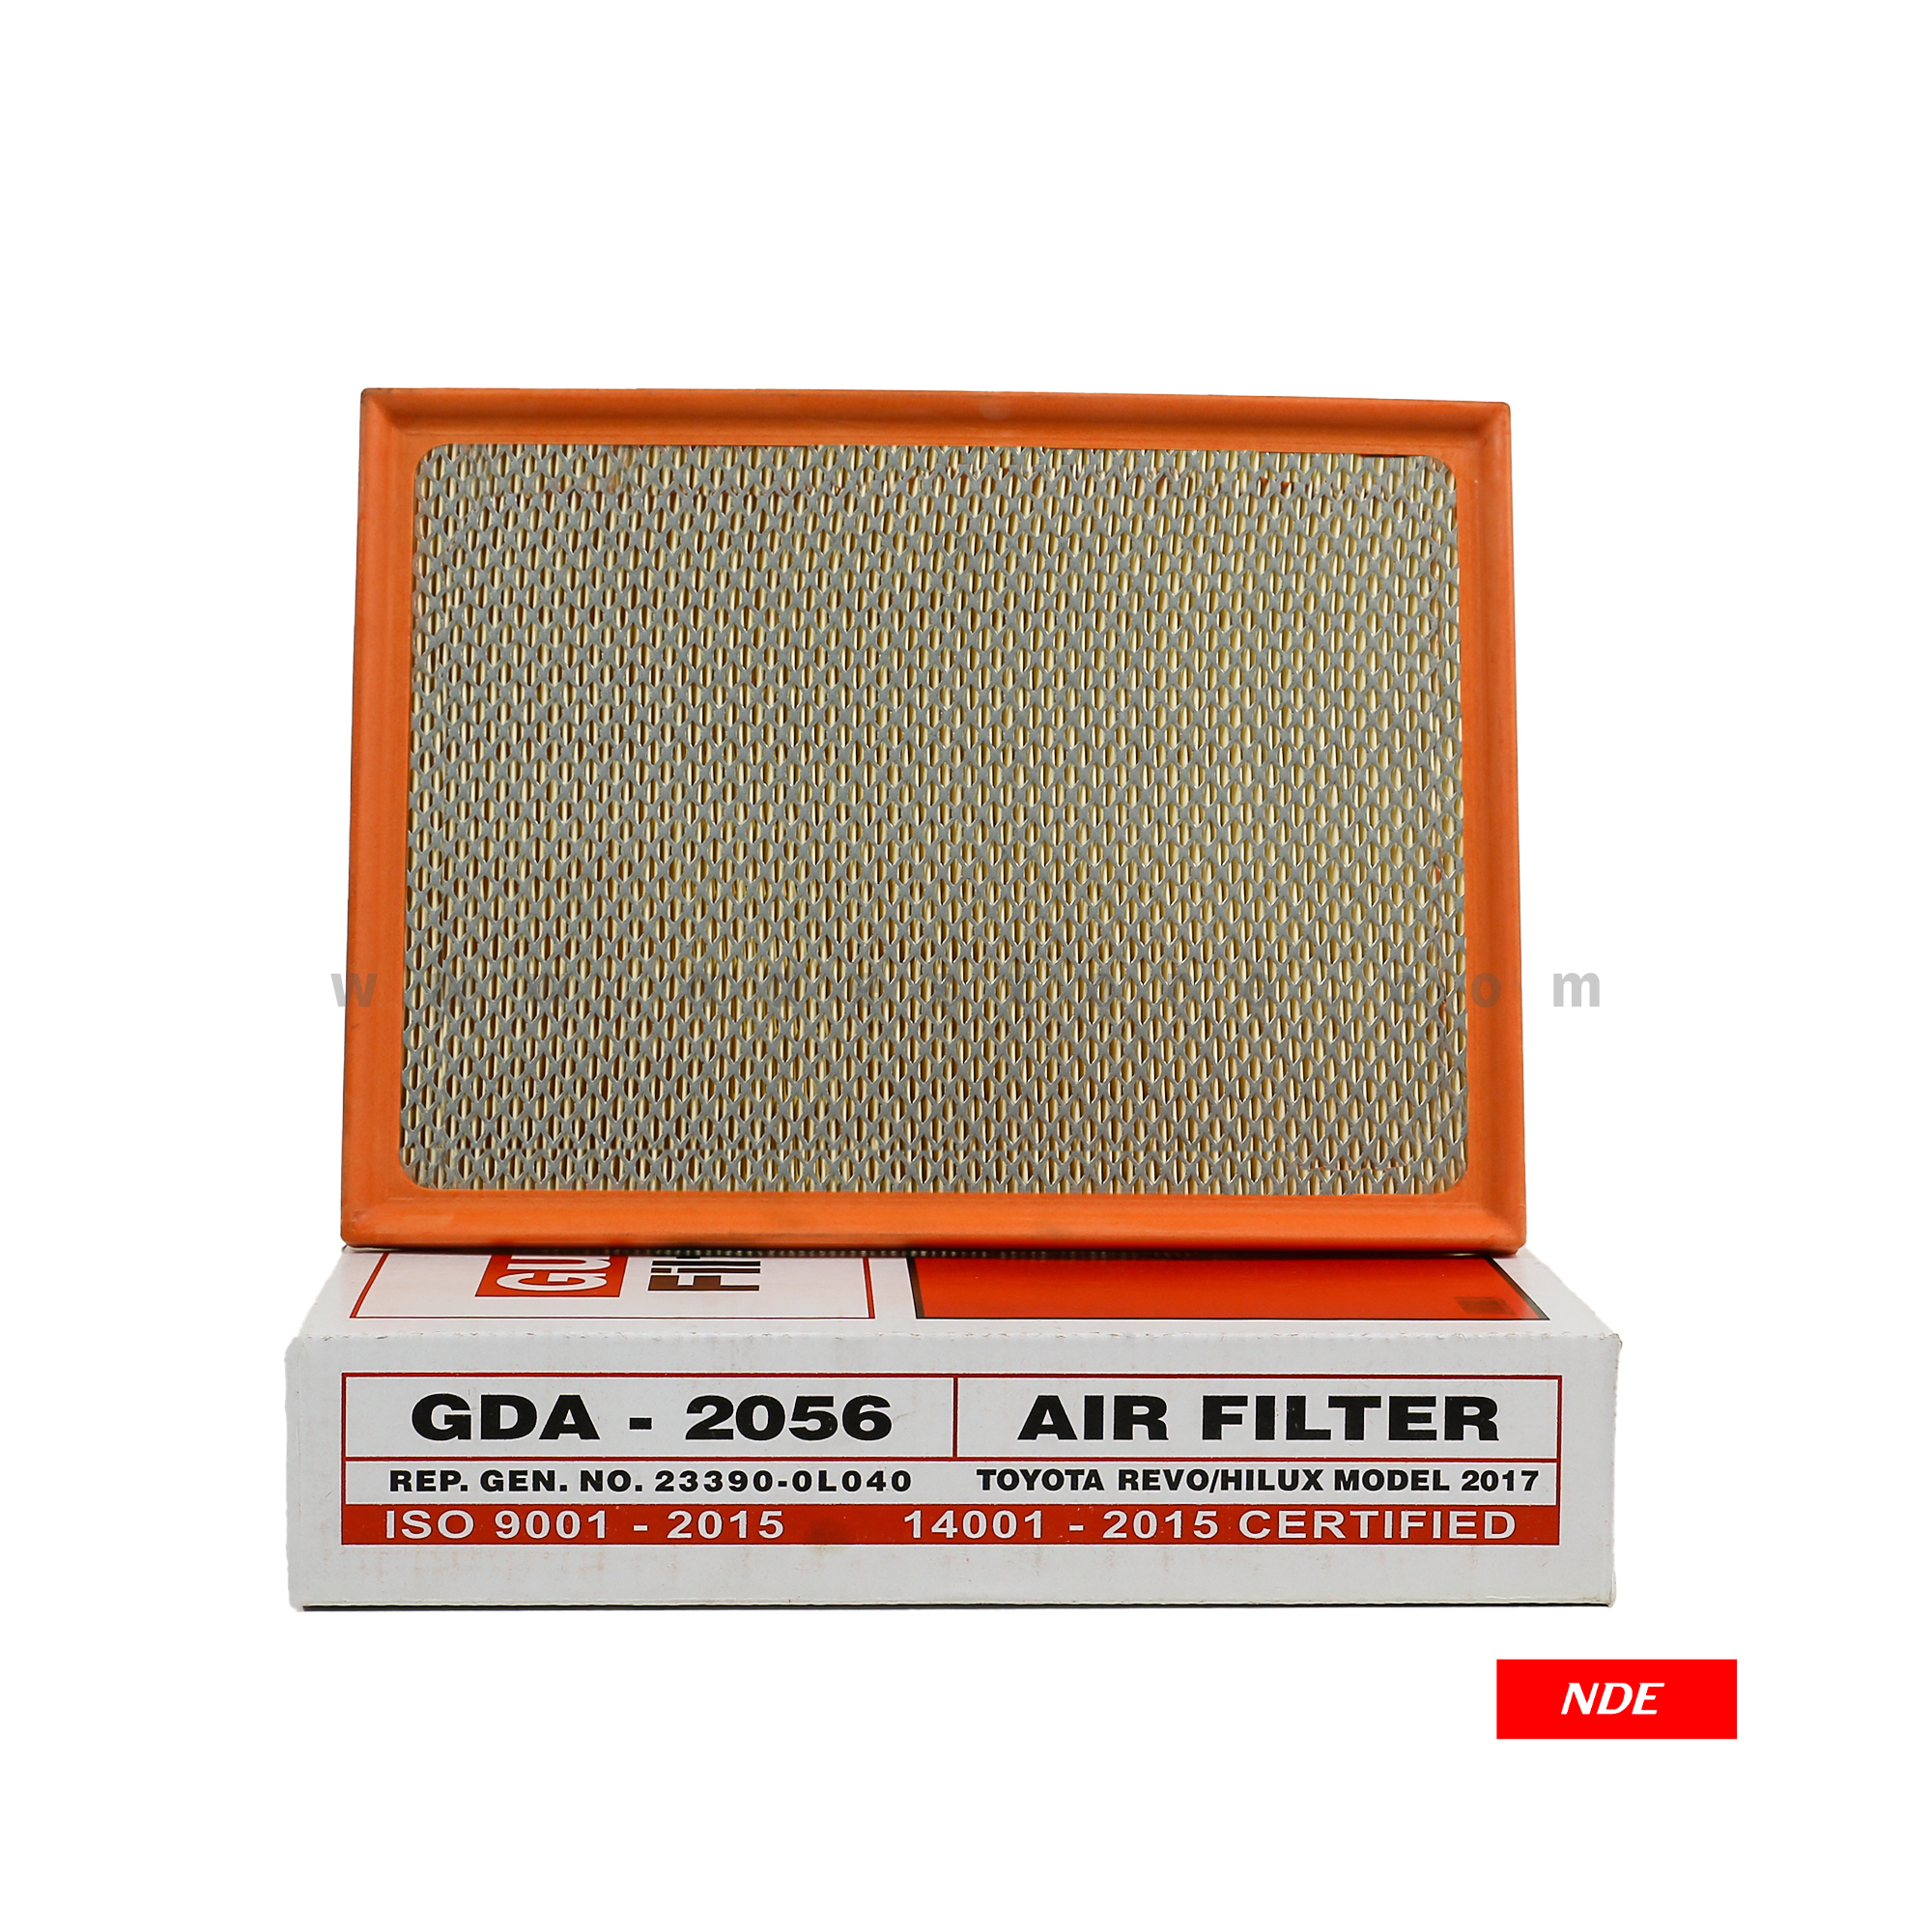 AIR FILTER GUARD FILTER FOR TOYOTA FORTUNER